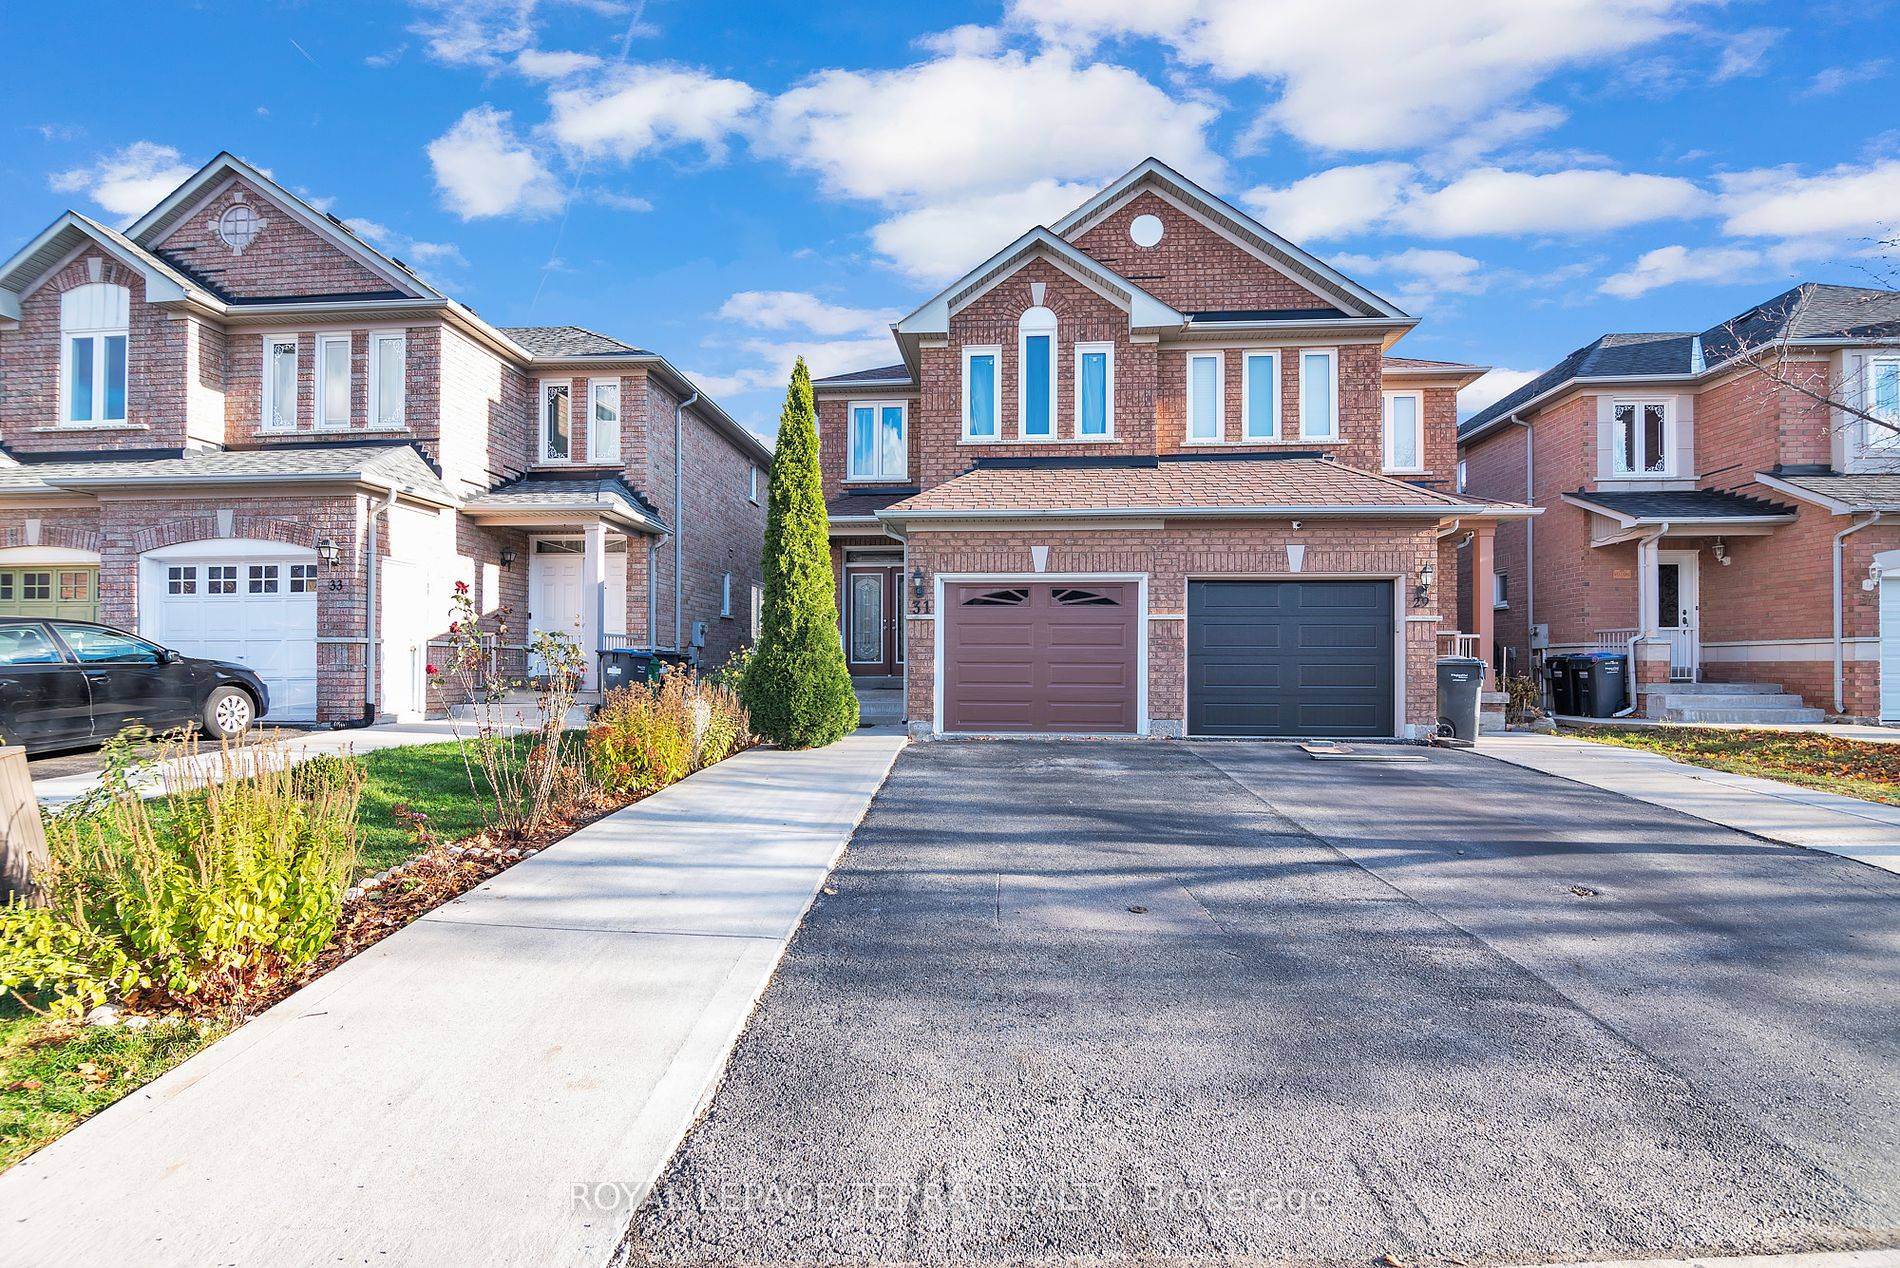 Charming semi detached home in Brampton, mere seconds from Trinity Common Mall and easy access to Hwy 410.